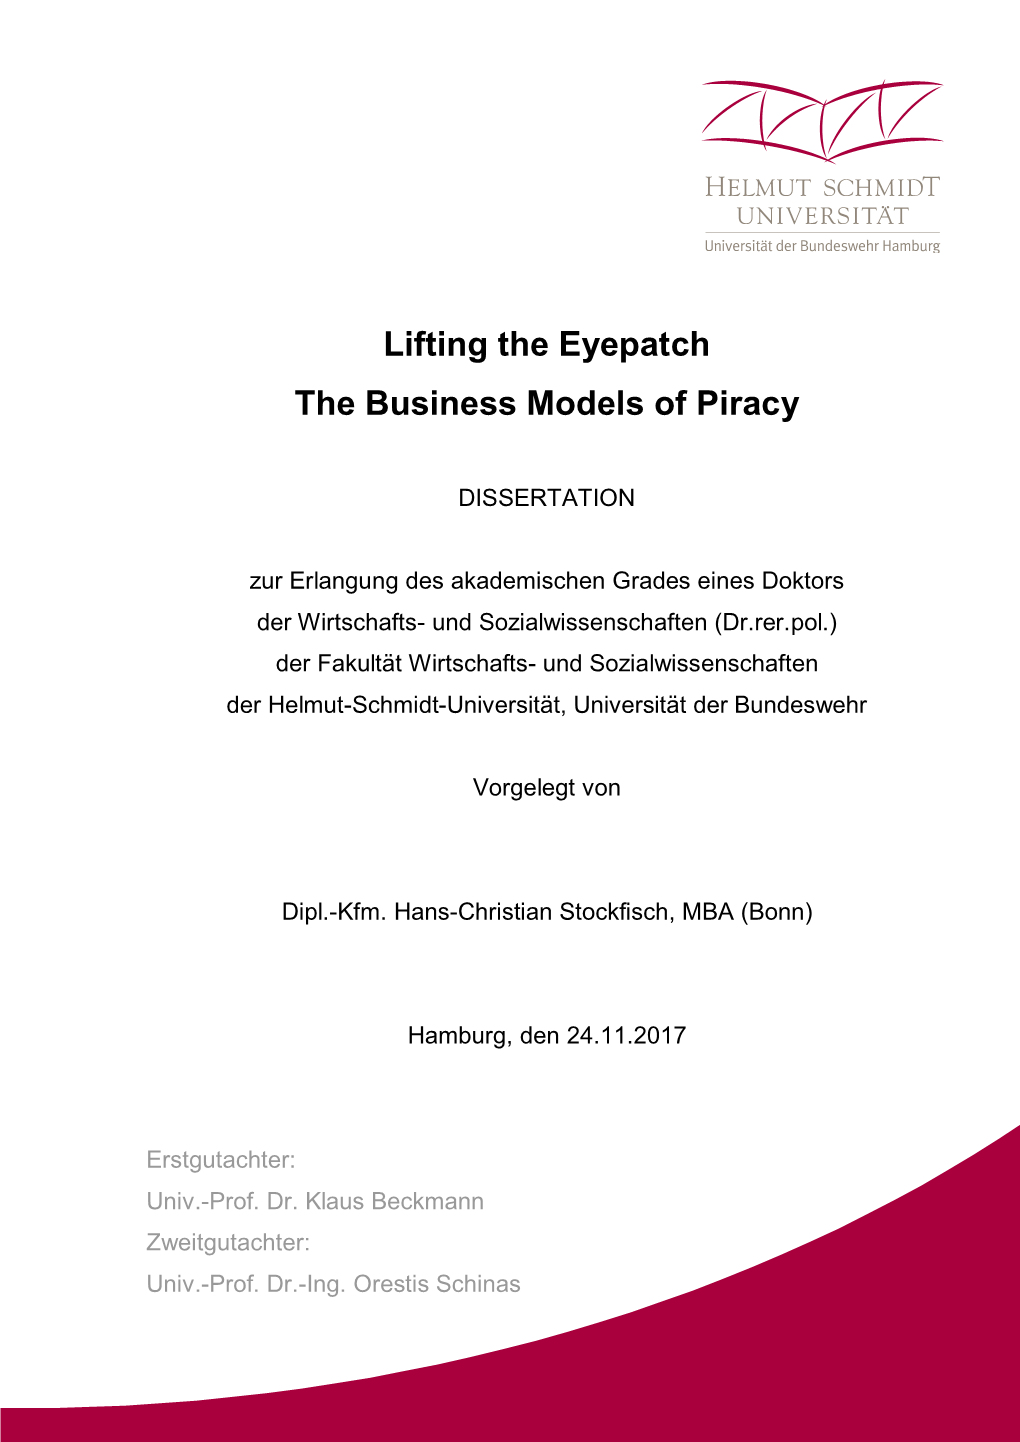 Lifting the Eyepatch the Business Models of Piracy